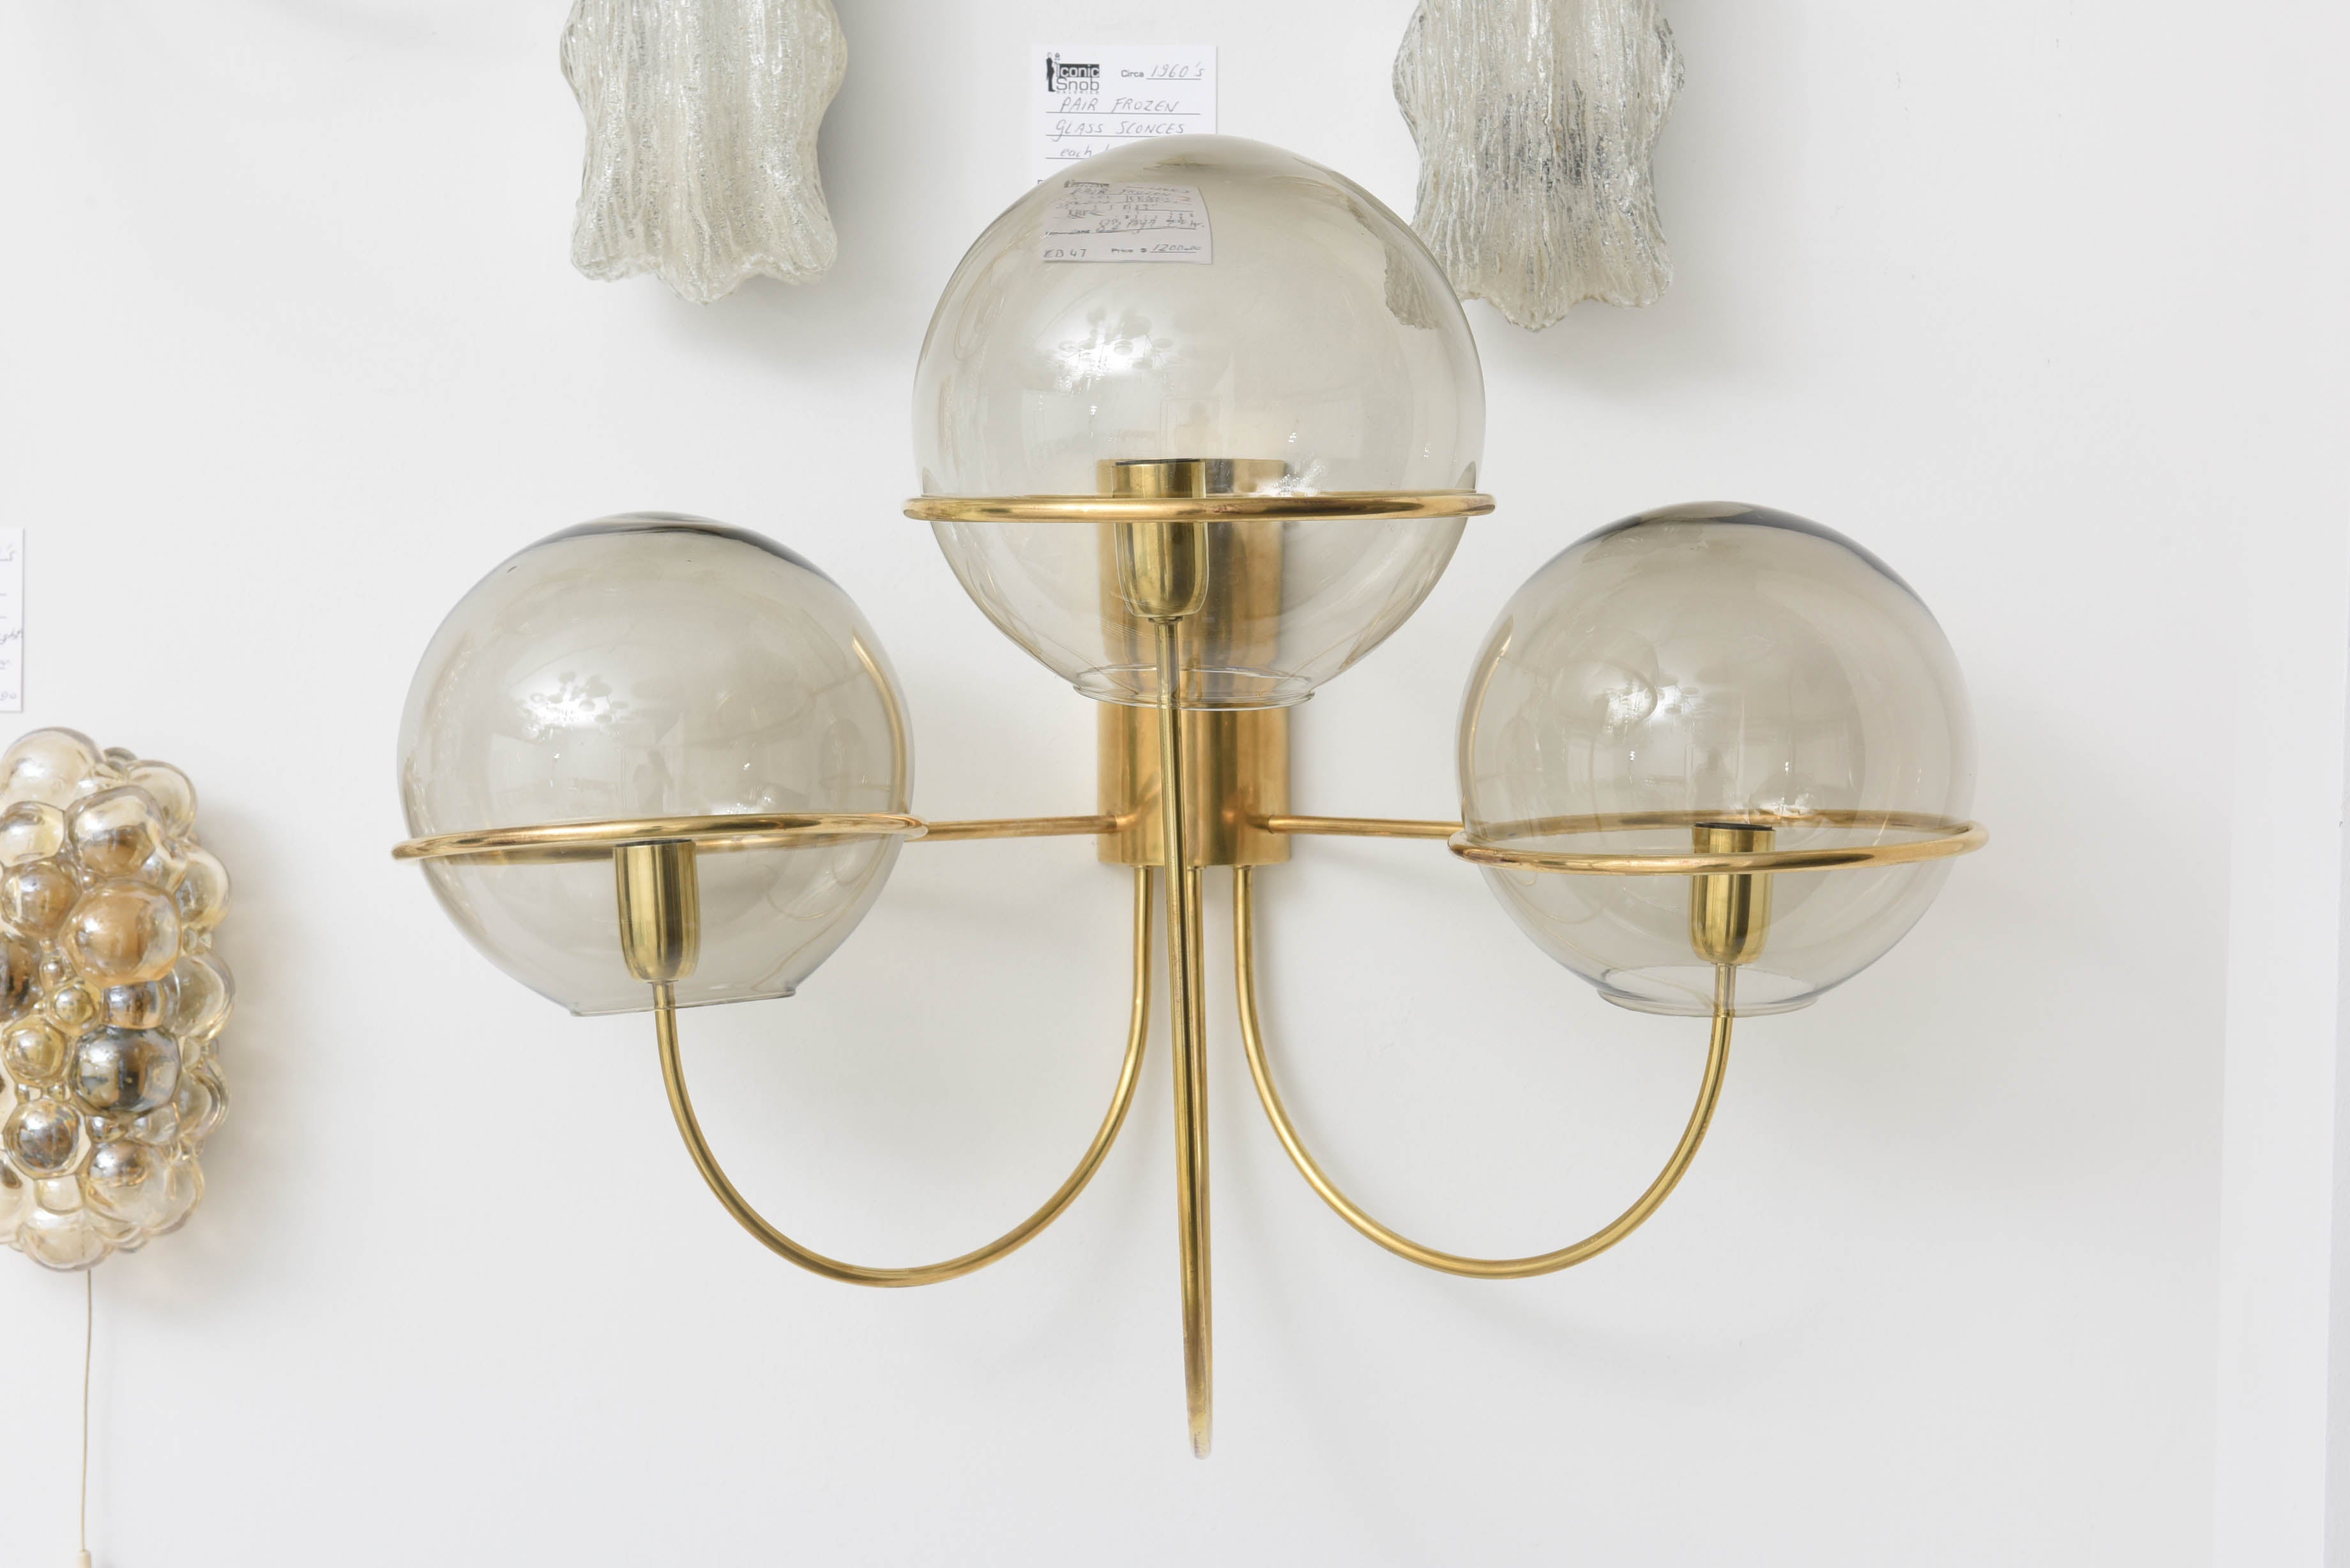 These amazing large-scaled Mid-Century Modern wall sconces in polished brass with smoked-glass globes were produced by Koeln Leuchten of Germany in the 1960s. 

These pieces are large in their size yet quite delicate and elegant in their